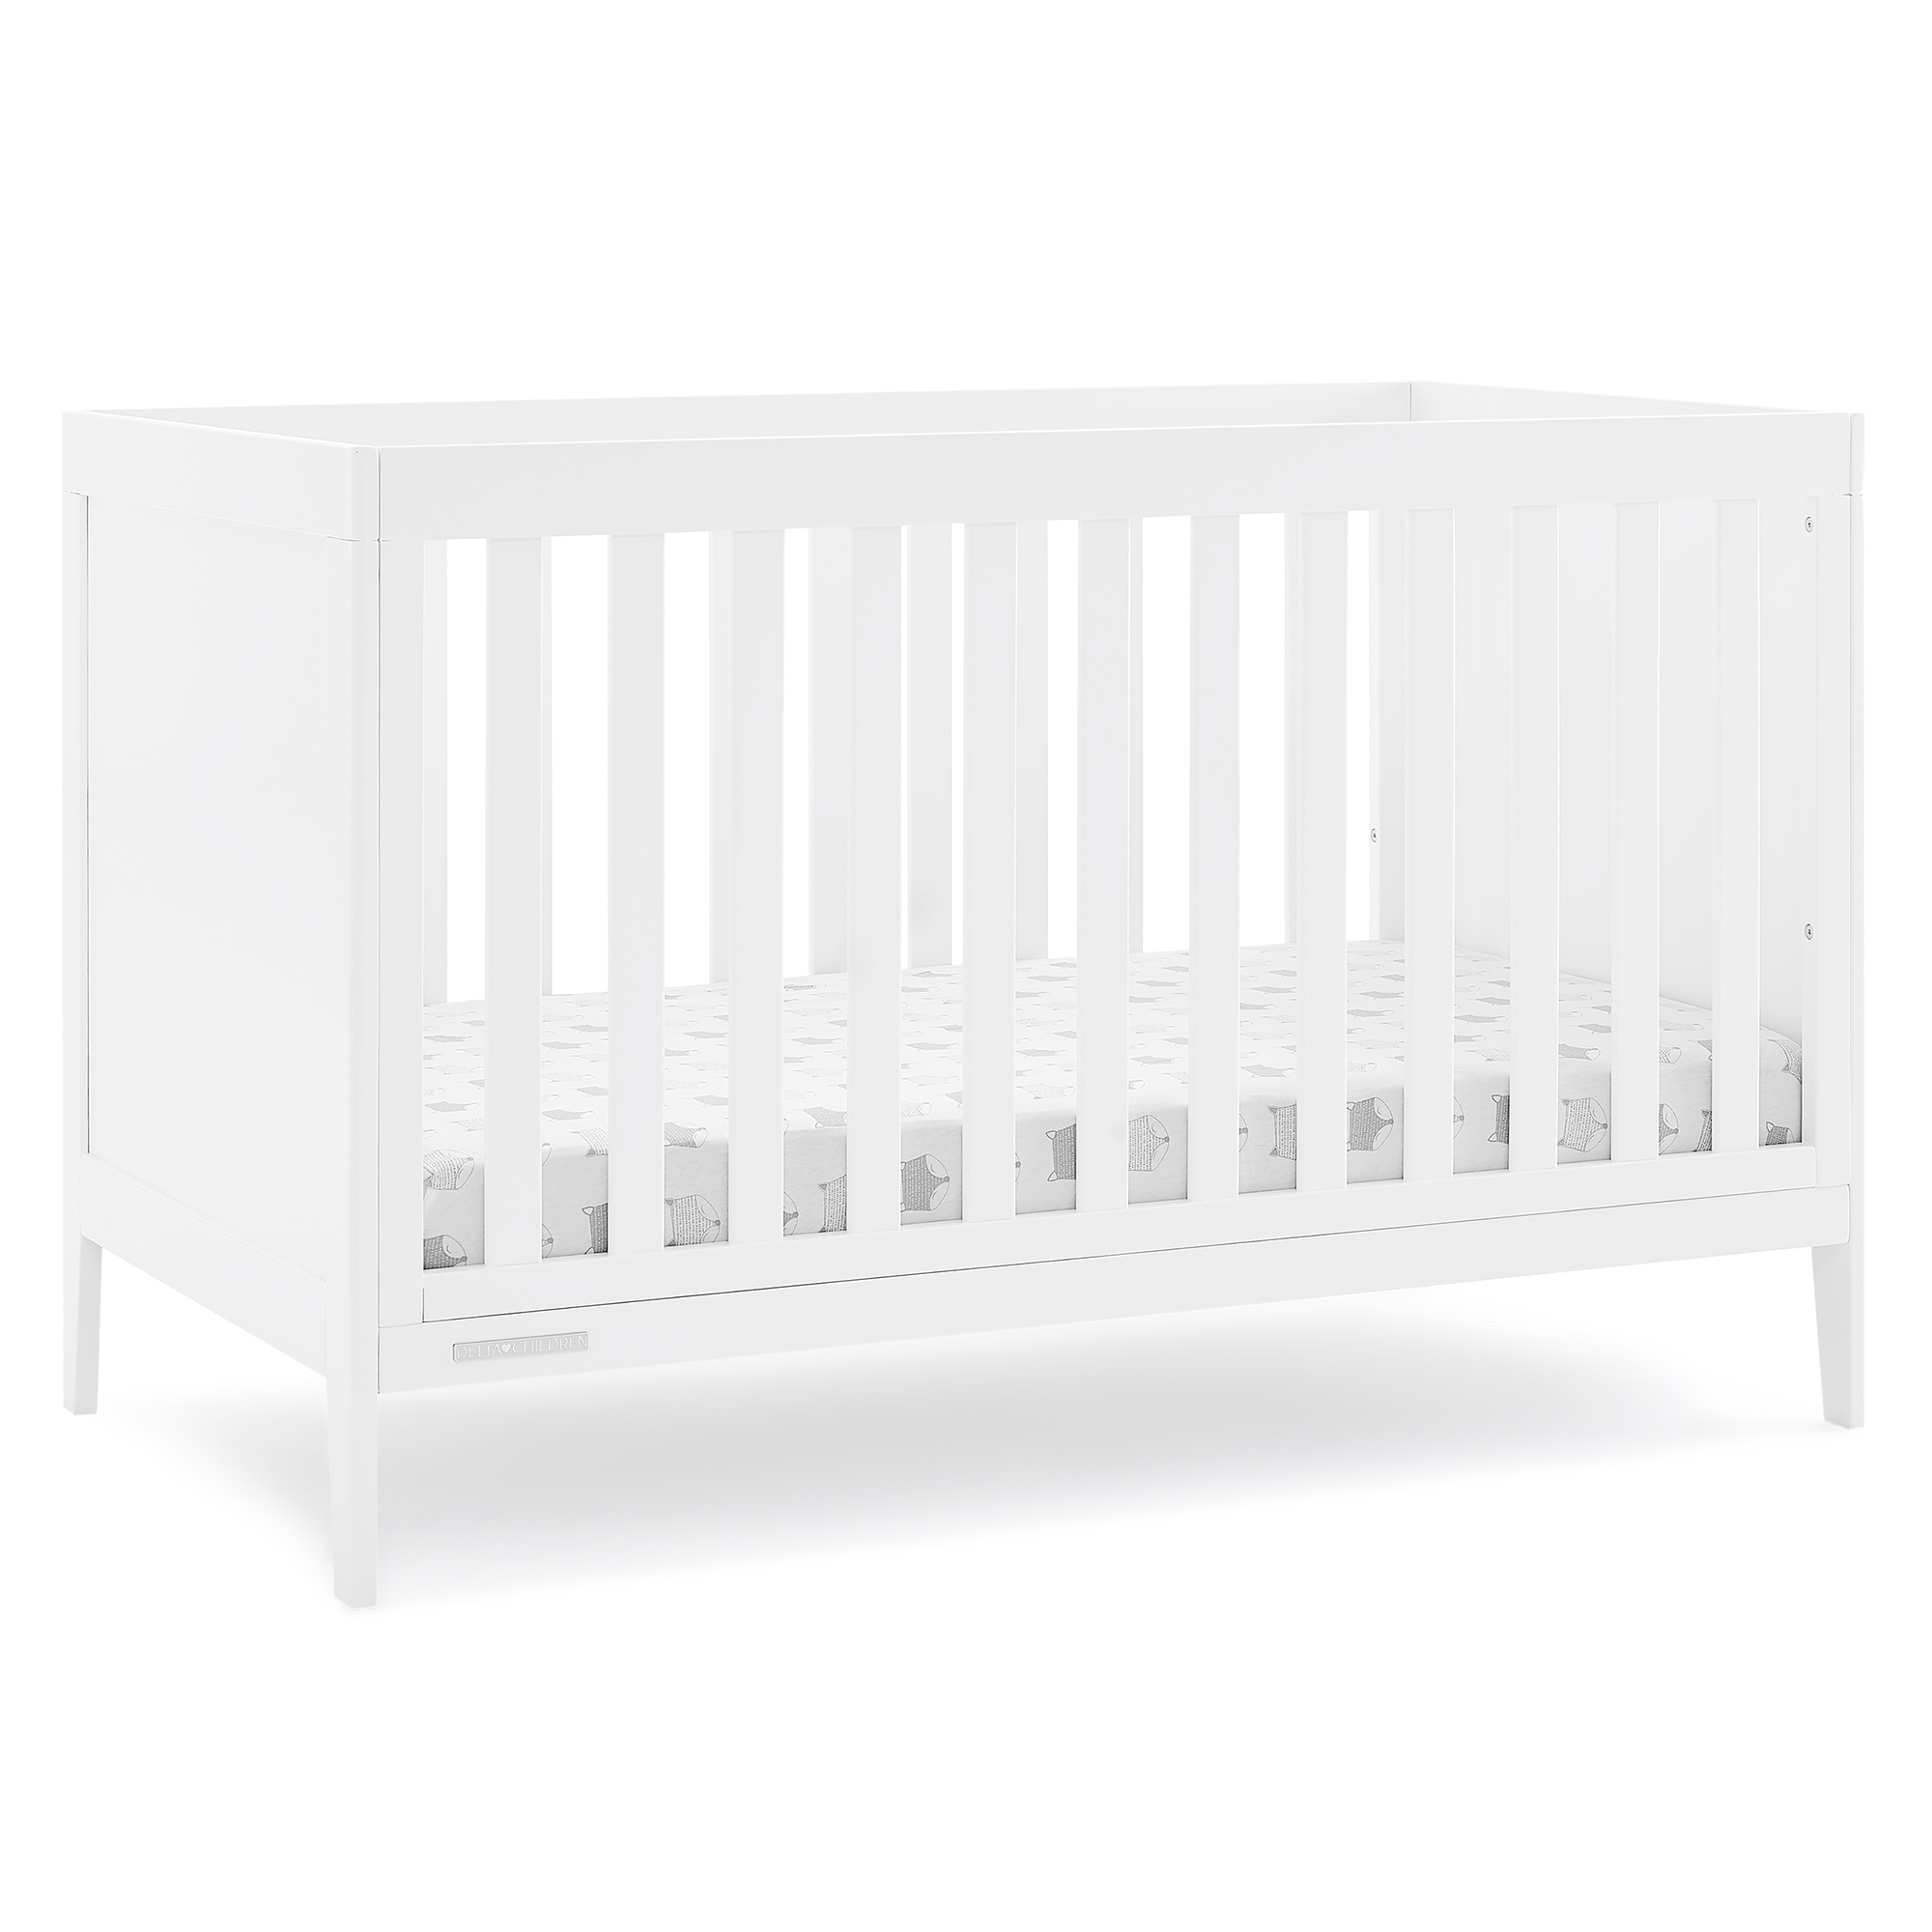 Delta Children Hayes 4-in-1 Convertible Baby Crib - Greenguard Gold Certified, Bianca White - image 1 of 14